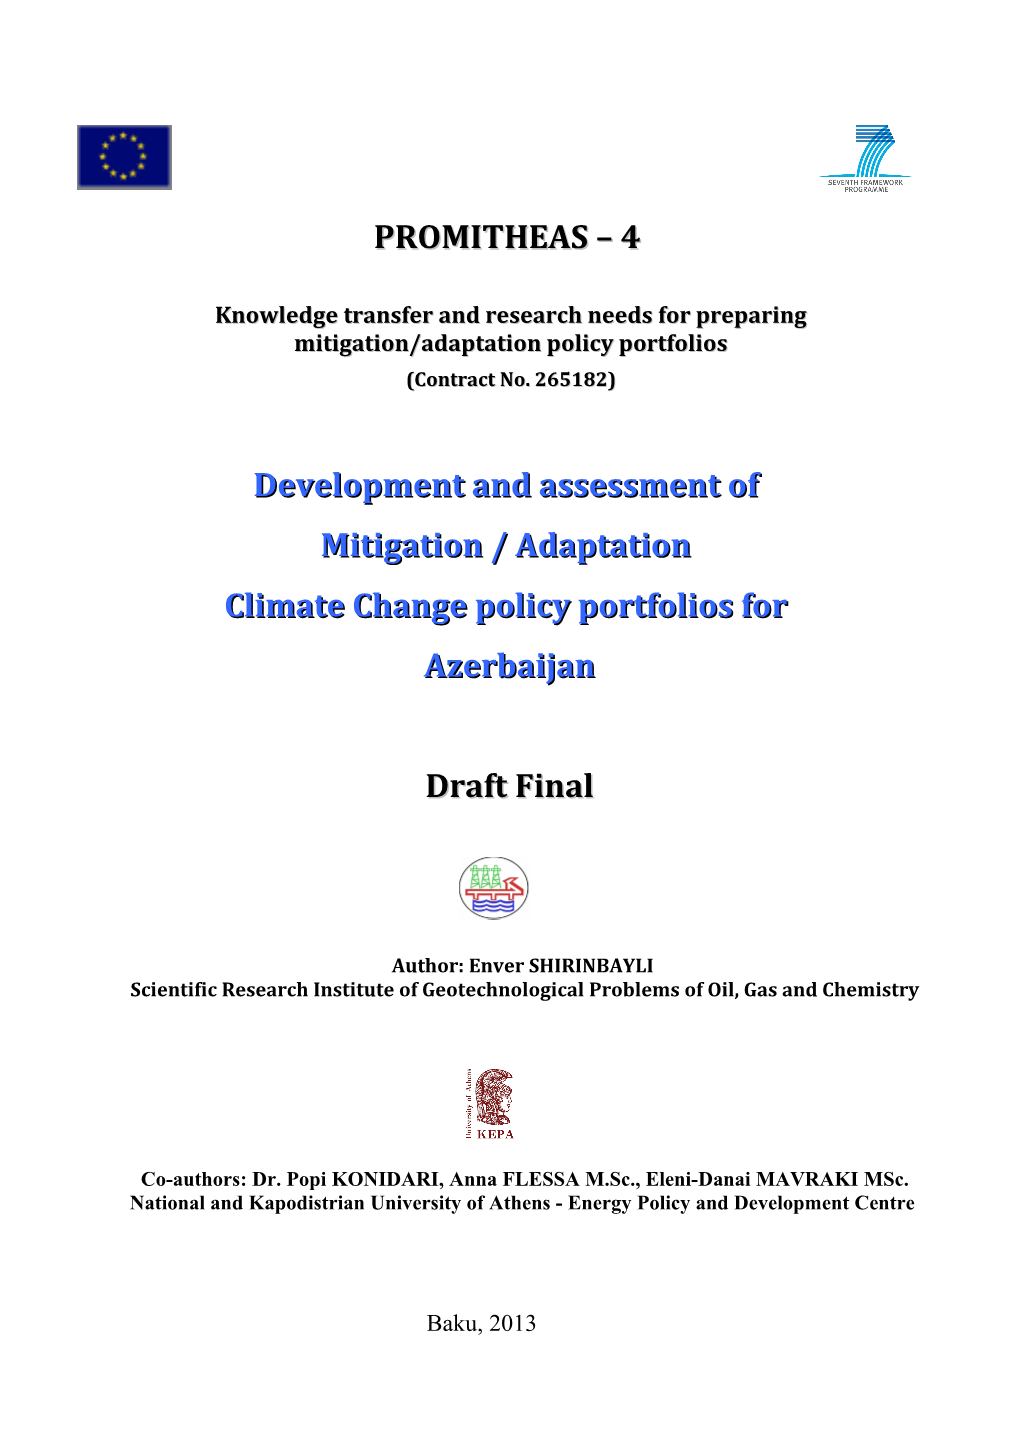 Knowledge Transfer and Research Needs for Preparing Mitigation/Adaptation Policy Portfolios